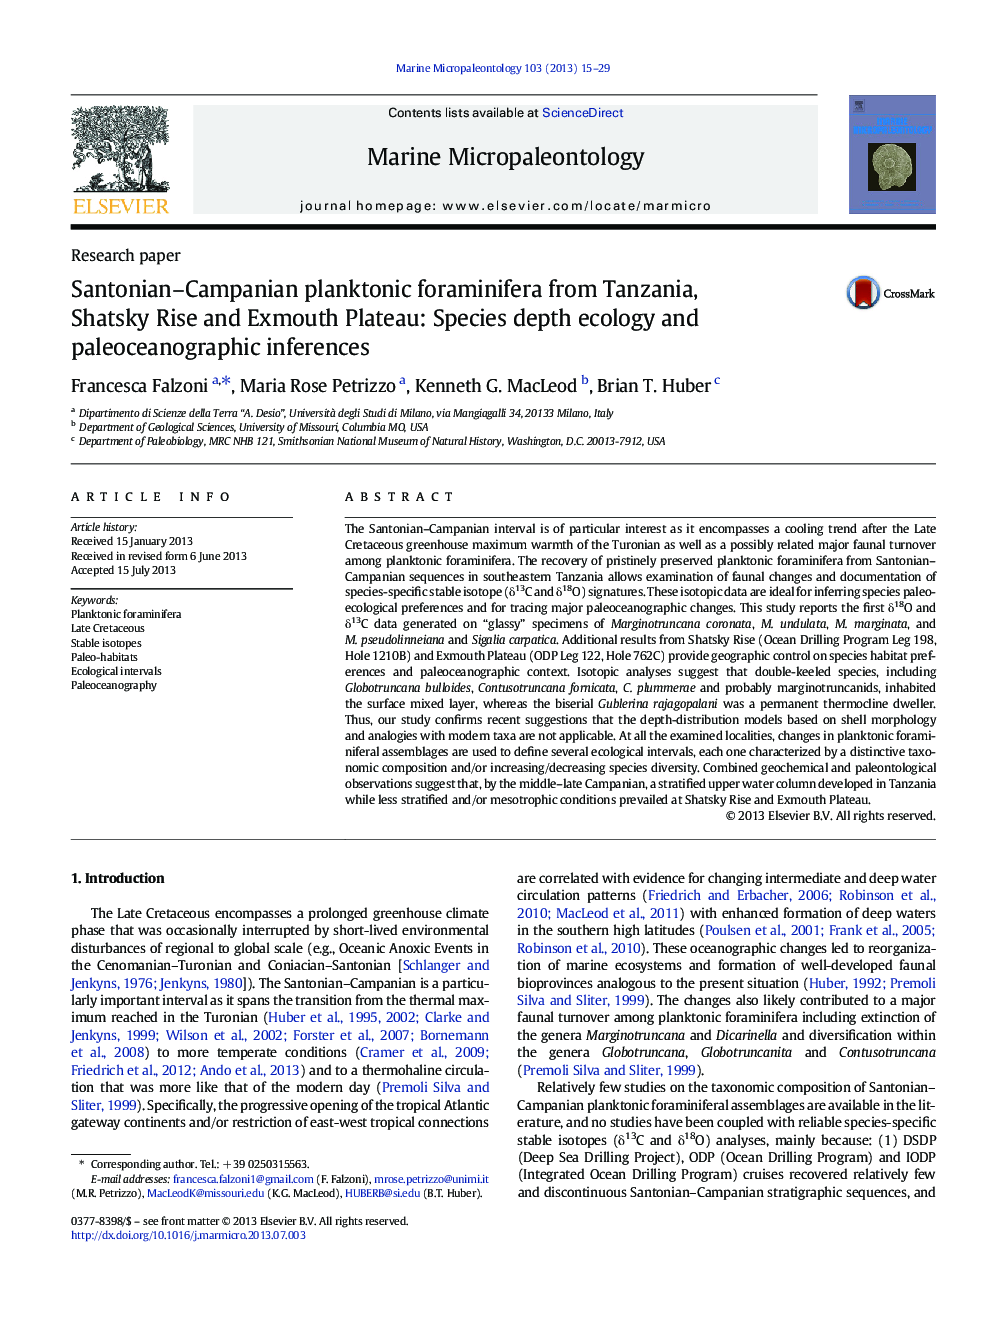 Santonian–Campanian planktonic foraminifera from Tanzania, Shatsky Rise and Exmouth Plateau: Species depth ecology and paleoceanographic inferences